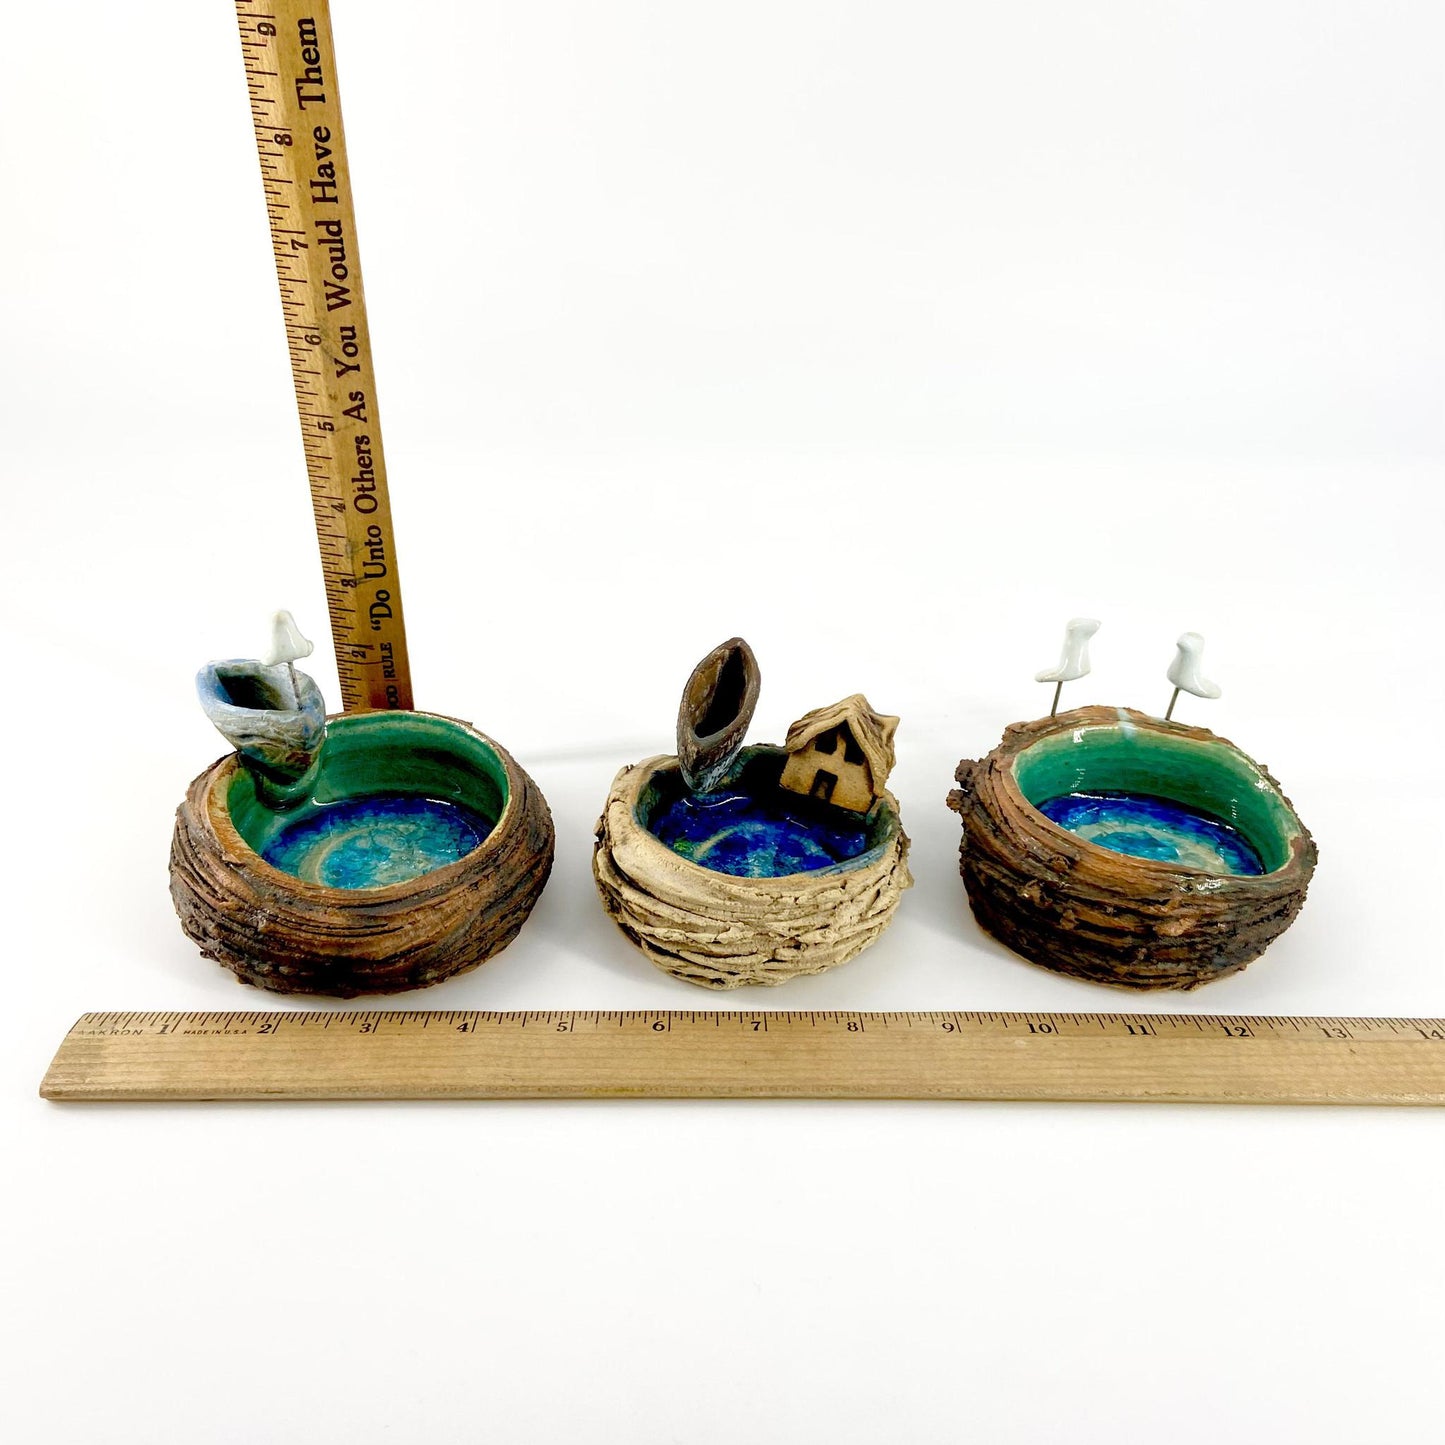 Sculpture - "Small Pond w/ Boat"